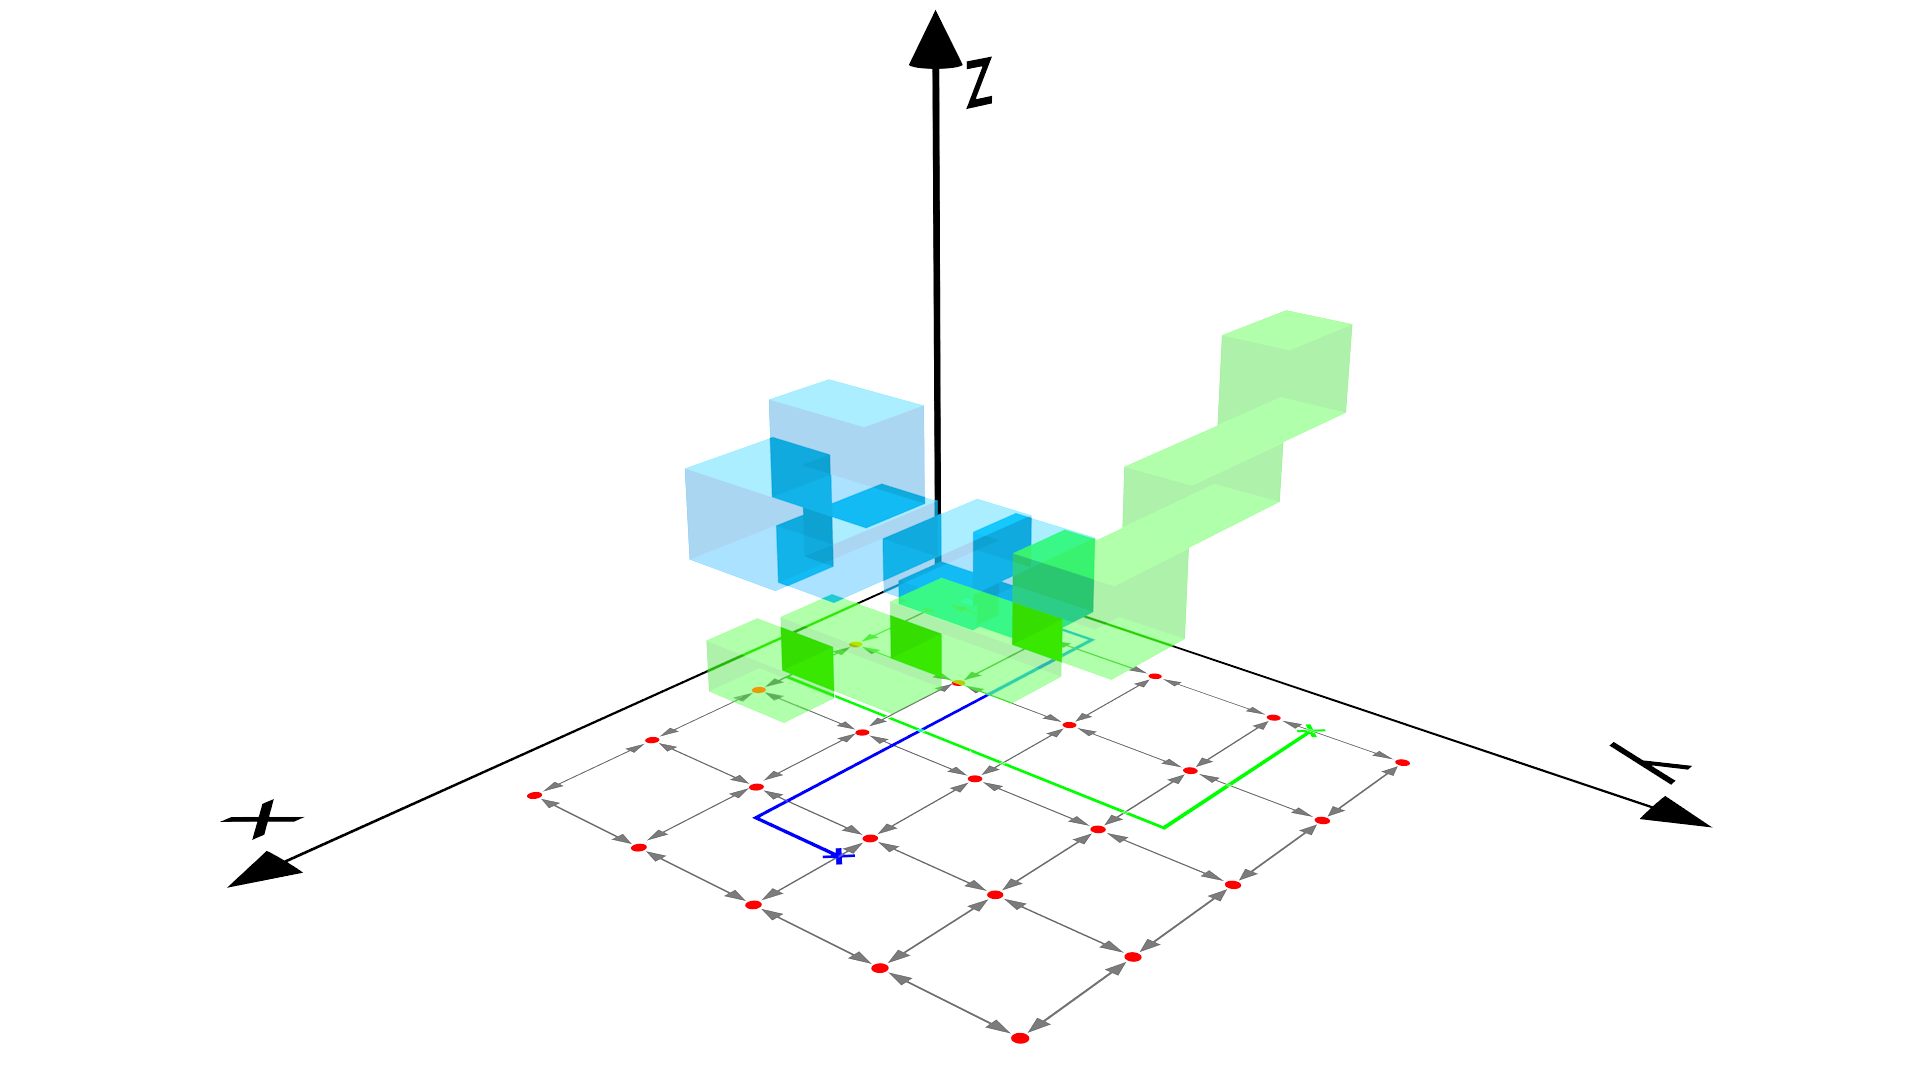 Visualization of planned CARP routes. Red circles depicts vertices of the topology, black arrows are the connecting edges of nodes. Blue and green lines on the floor (xyplane) depicts the planned path. The blue and green boxes along the axis depicts the planned path in the spacetime. This is the basis for CARP to plan conflict free path